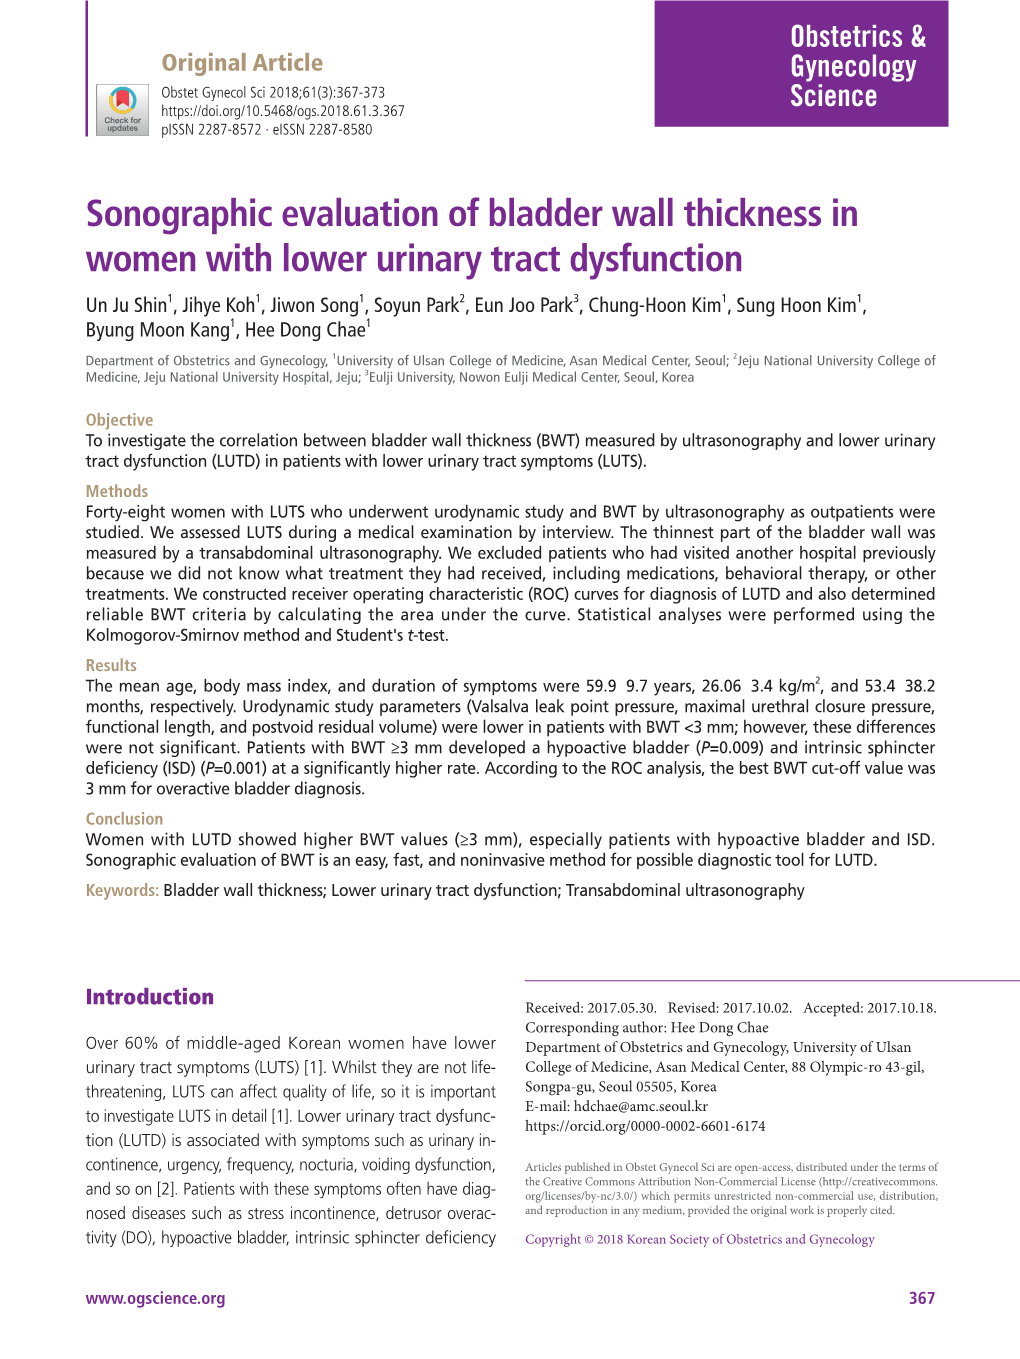 Sonographic Evaluation of Bladder Wall Thickness in Women with Lower